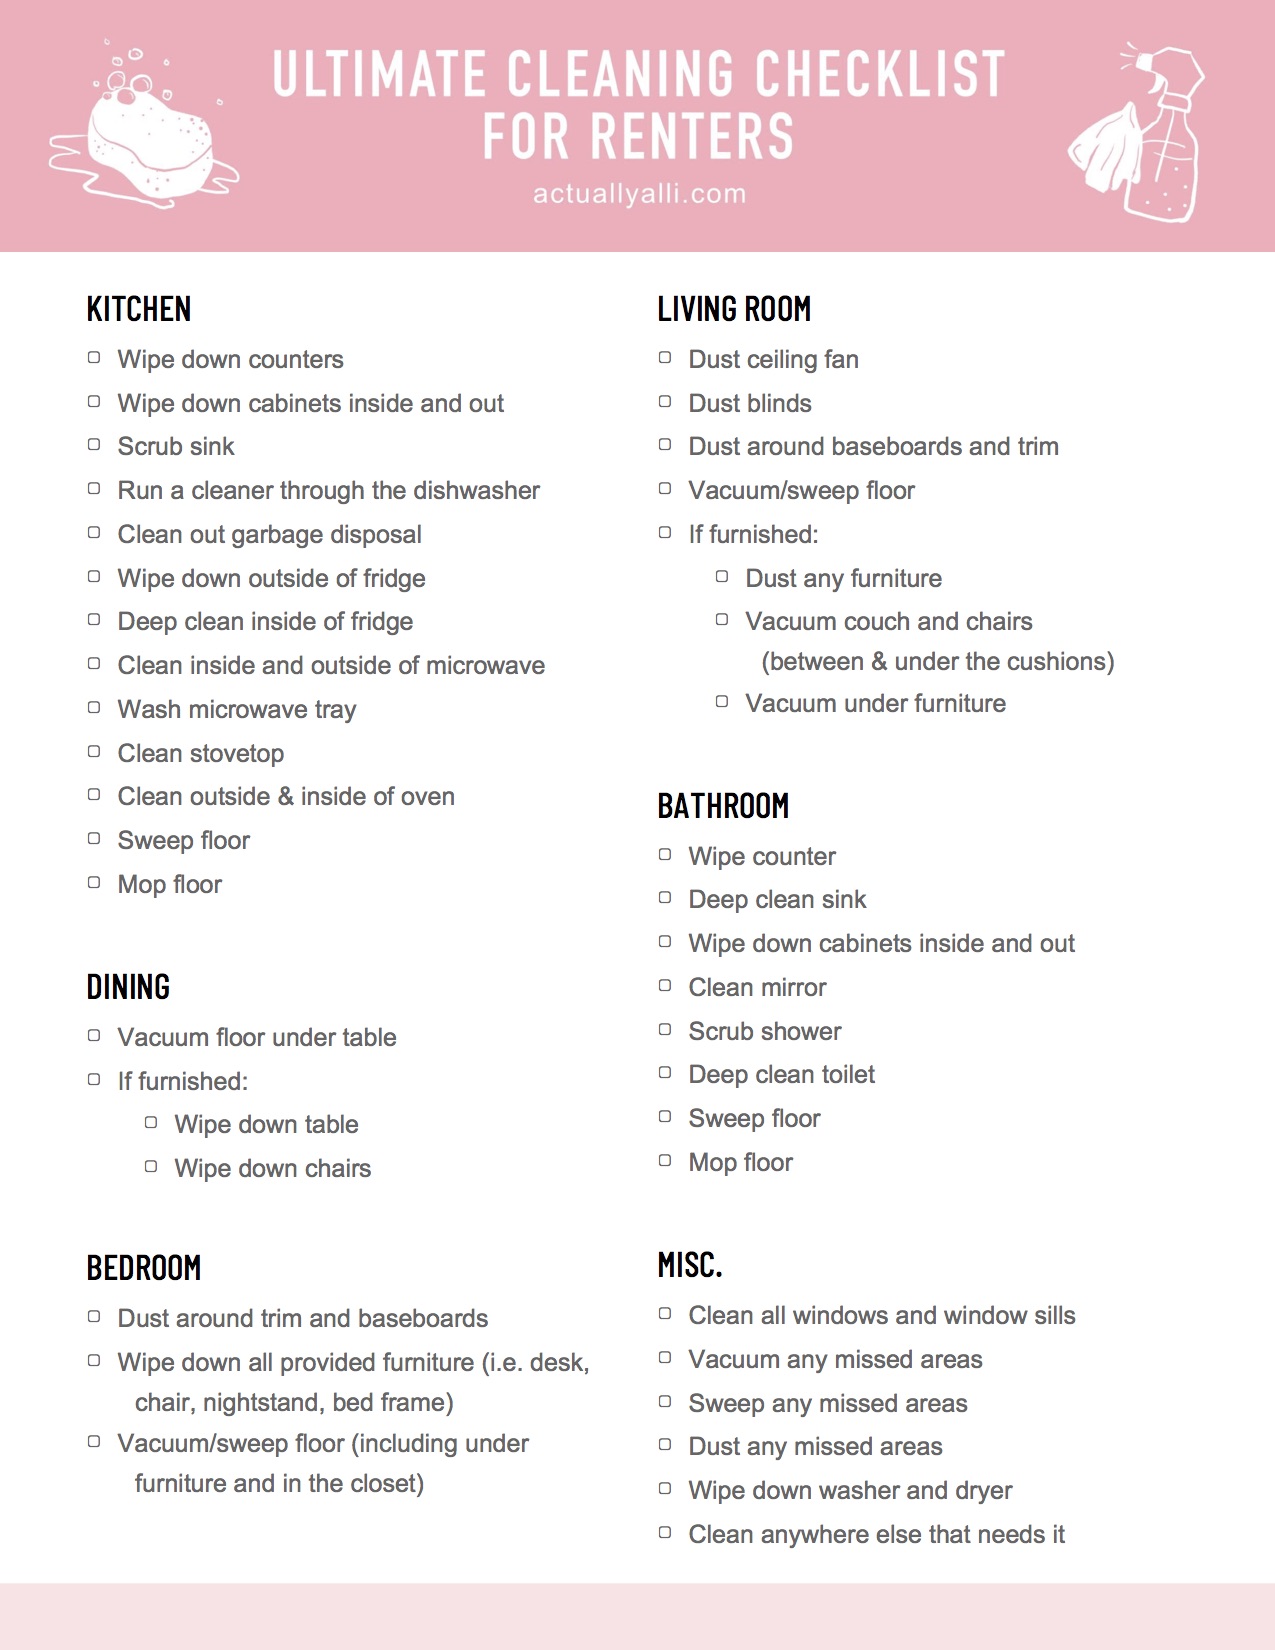 Renter S Ultimate Moving Guide Free Cleaning Checklist Actually Alli Diy Home Decor